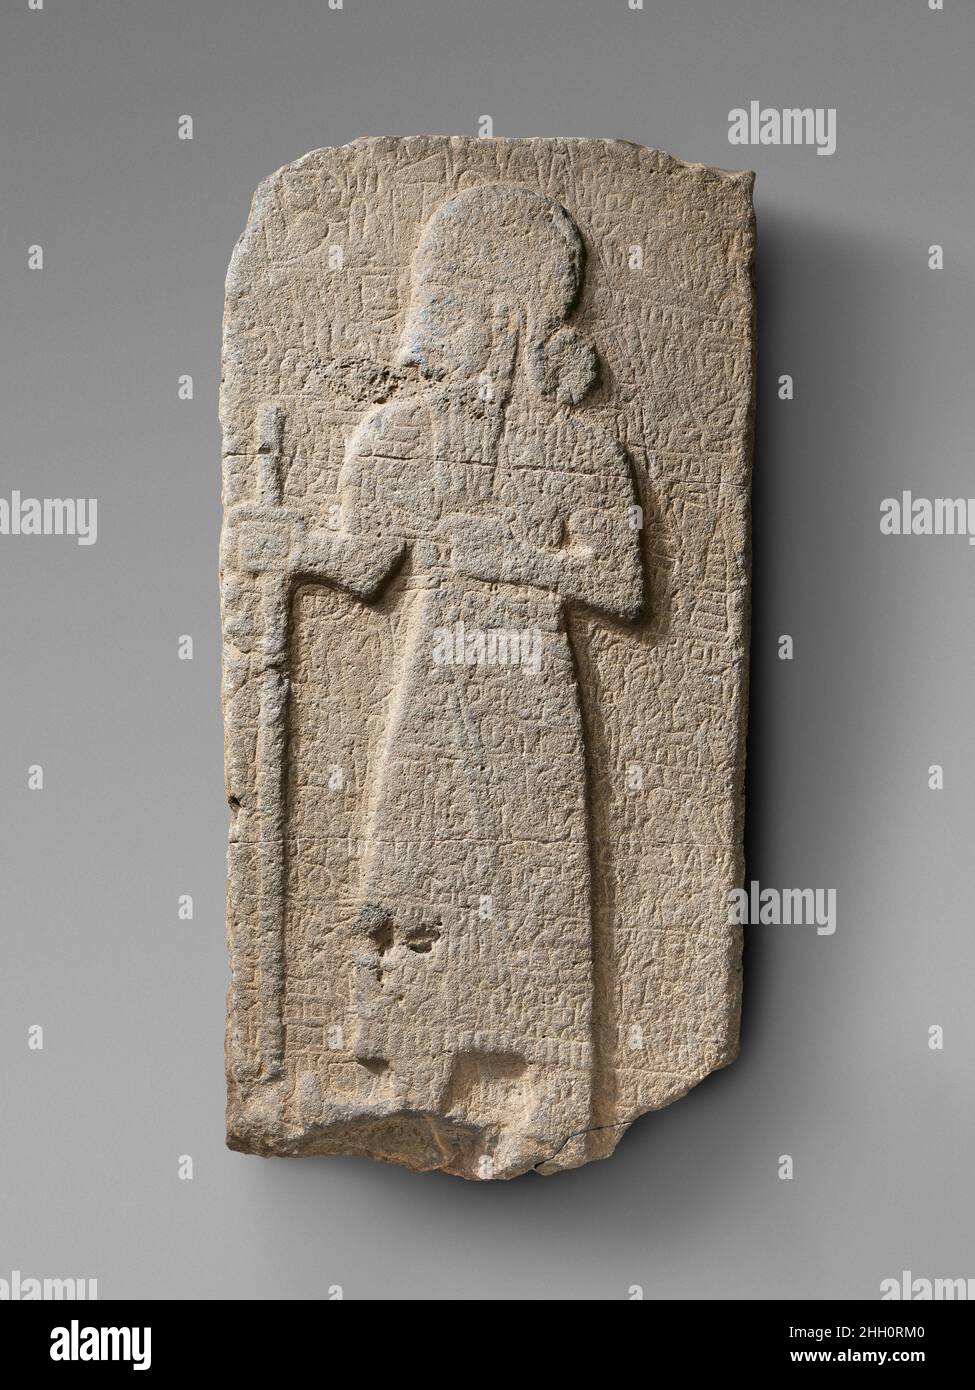 Relief: bearded figure holding staff; hieroglyphic inscription ca. early 1st millennium B.C. Hittite This stele depicts a bearded male figure facing left, surrounded by a shallowly incised inscription divided into seven lines. The figure is shown with attributes characteristic of ruling elites, including the long, fringed garment, the staff he holds in his right hand, his rounded headdress, and his hairstyle, in which the hair is gathered at the nape of the neck in a bunch. The surface of the stele is worn and details are no longer visible in many areas, including the face. The feet are damage Stock Photo